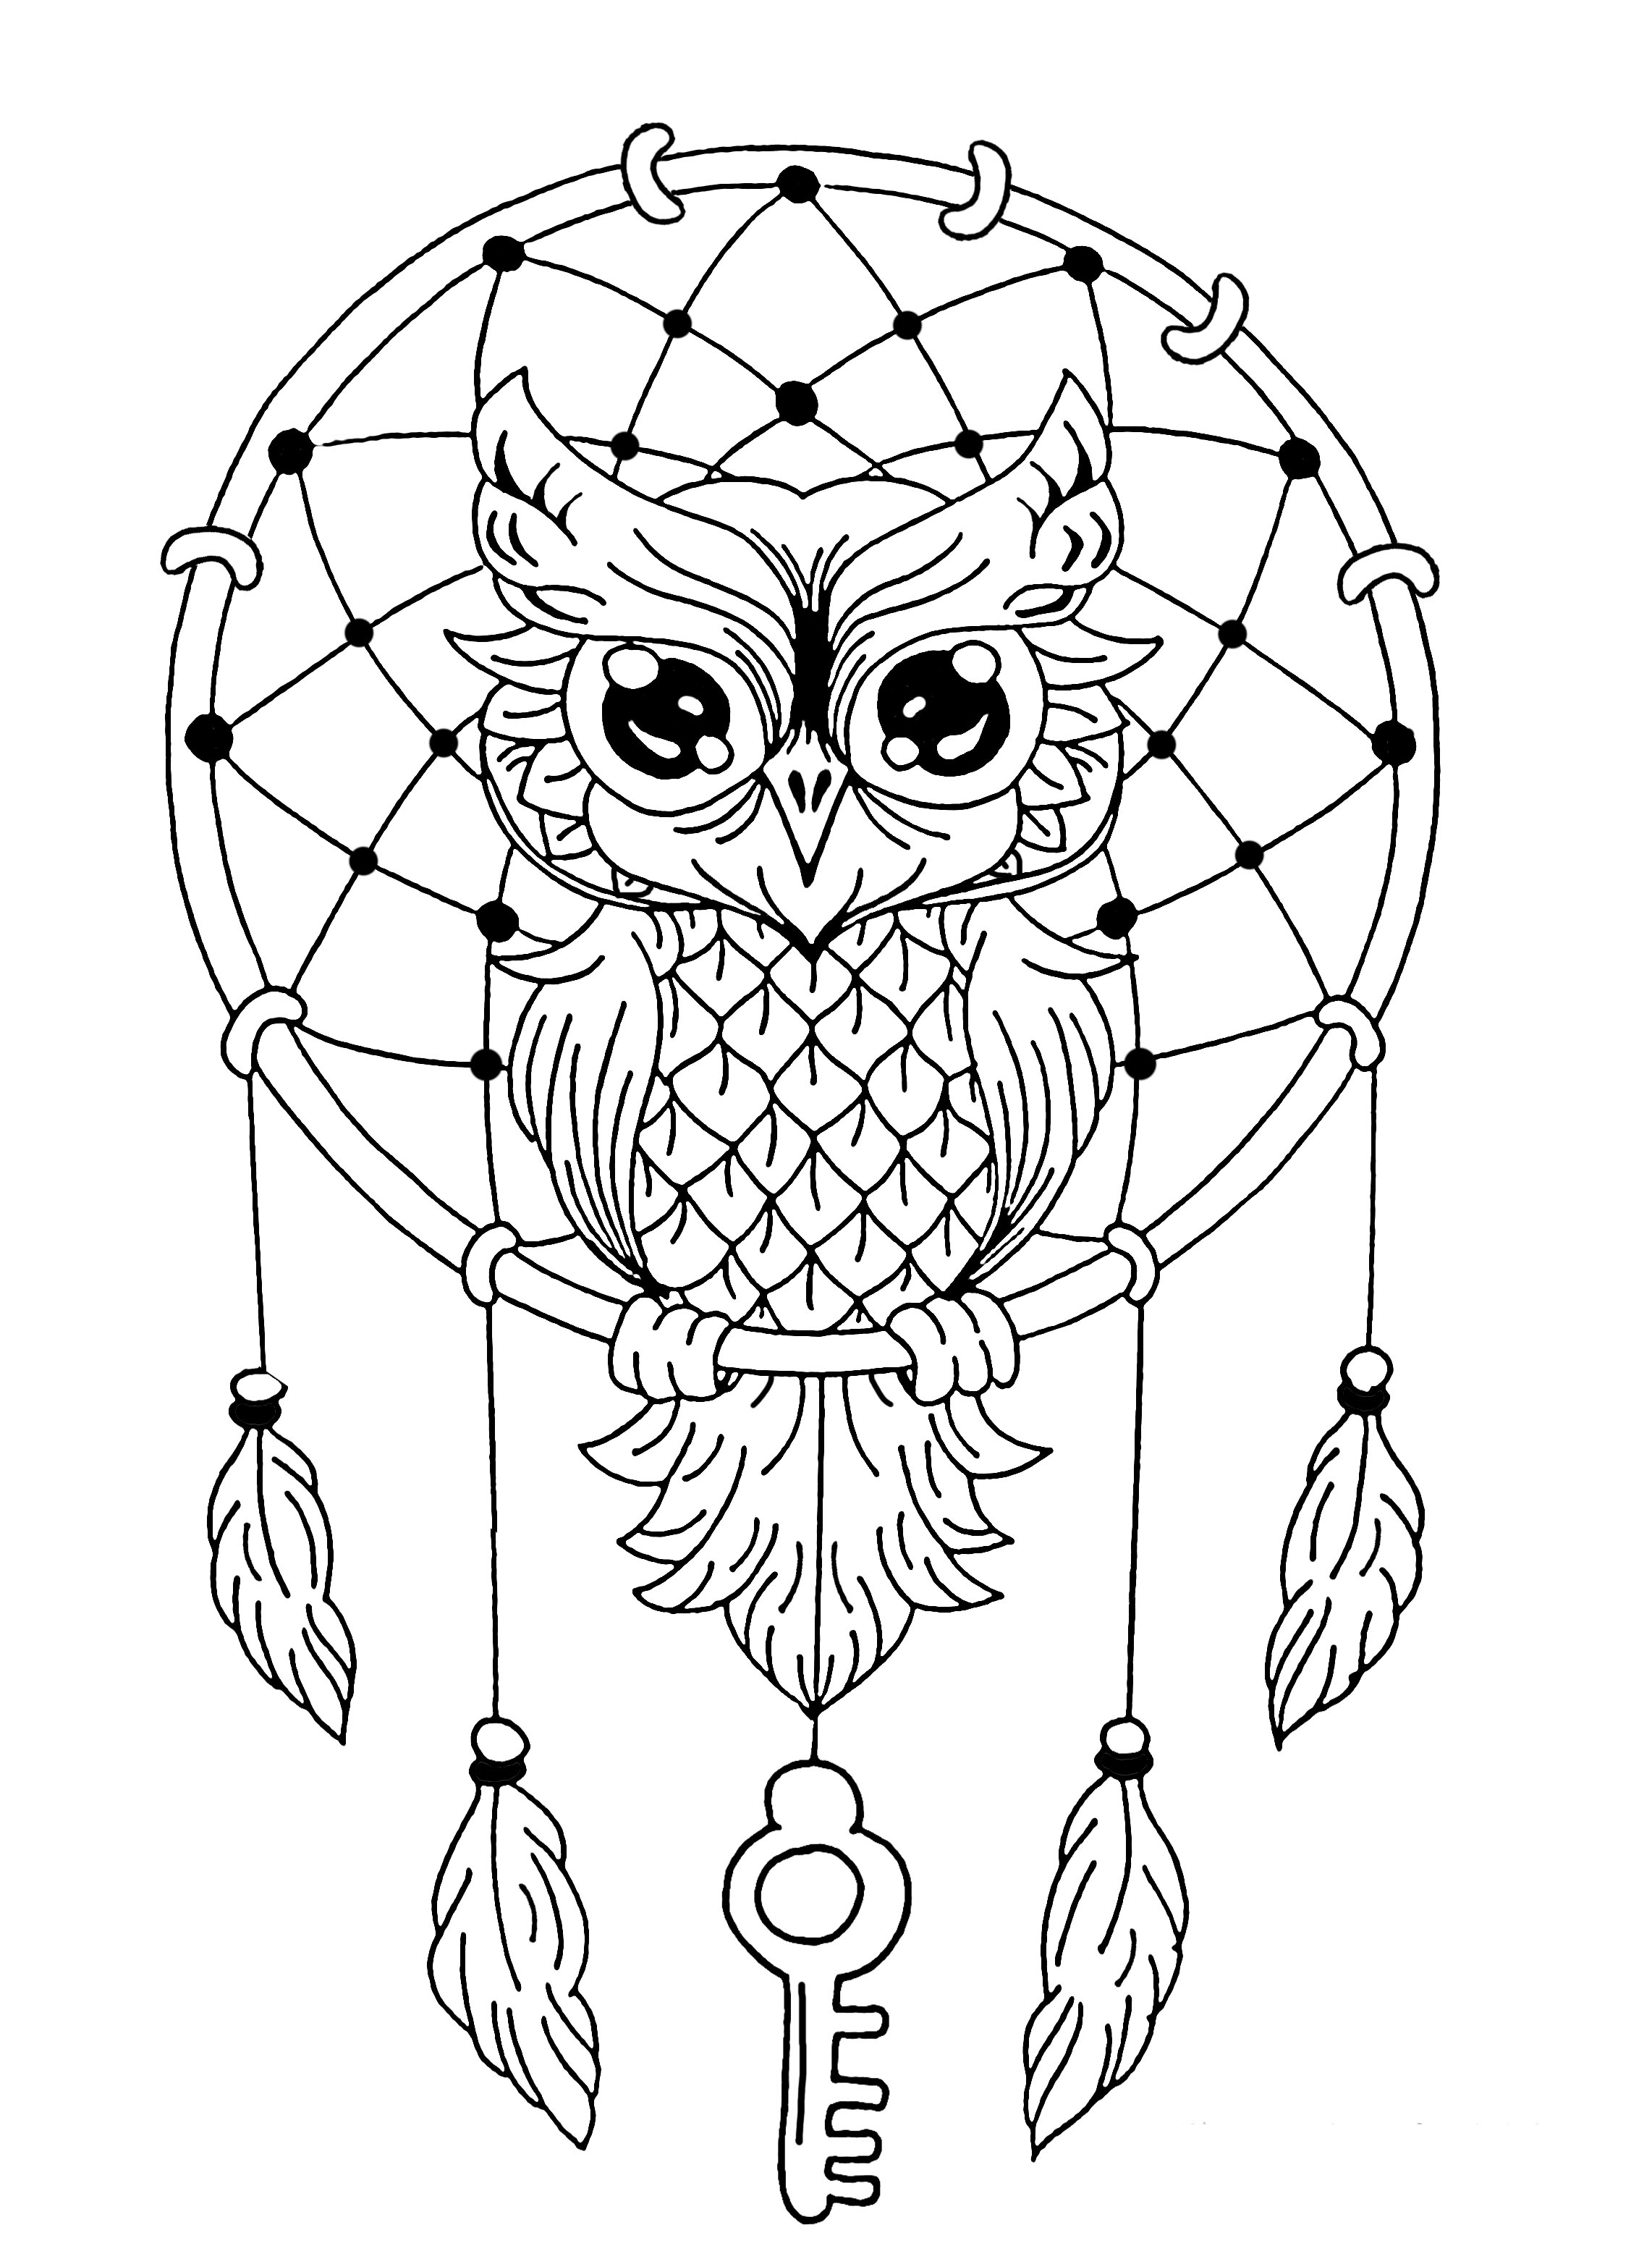 Coloring Pages : Coloring Pages Owl Dreamcatcher Owls For ...